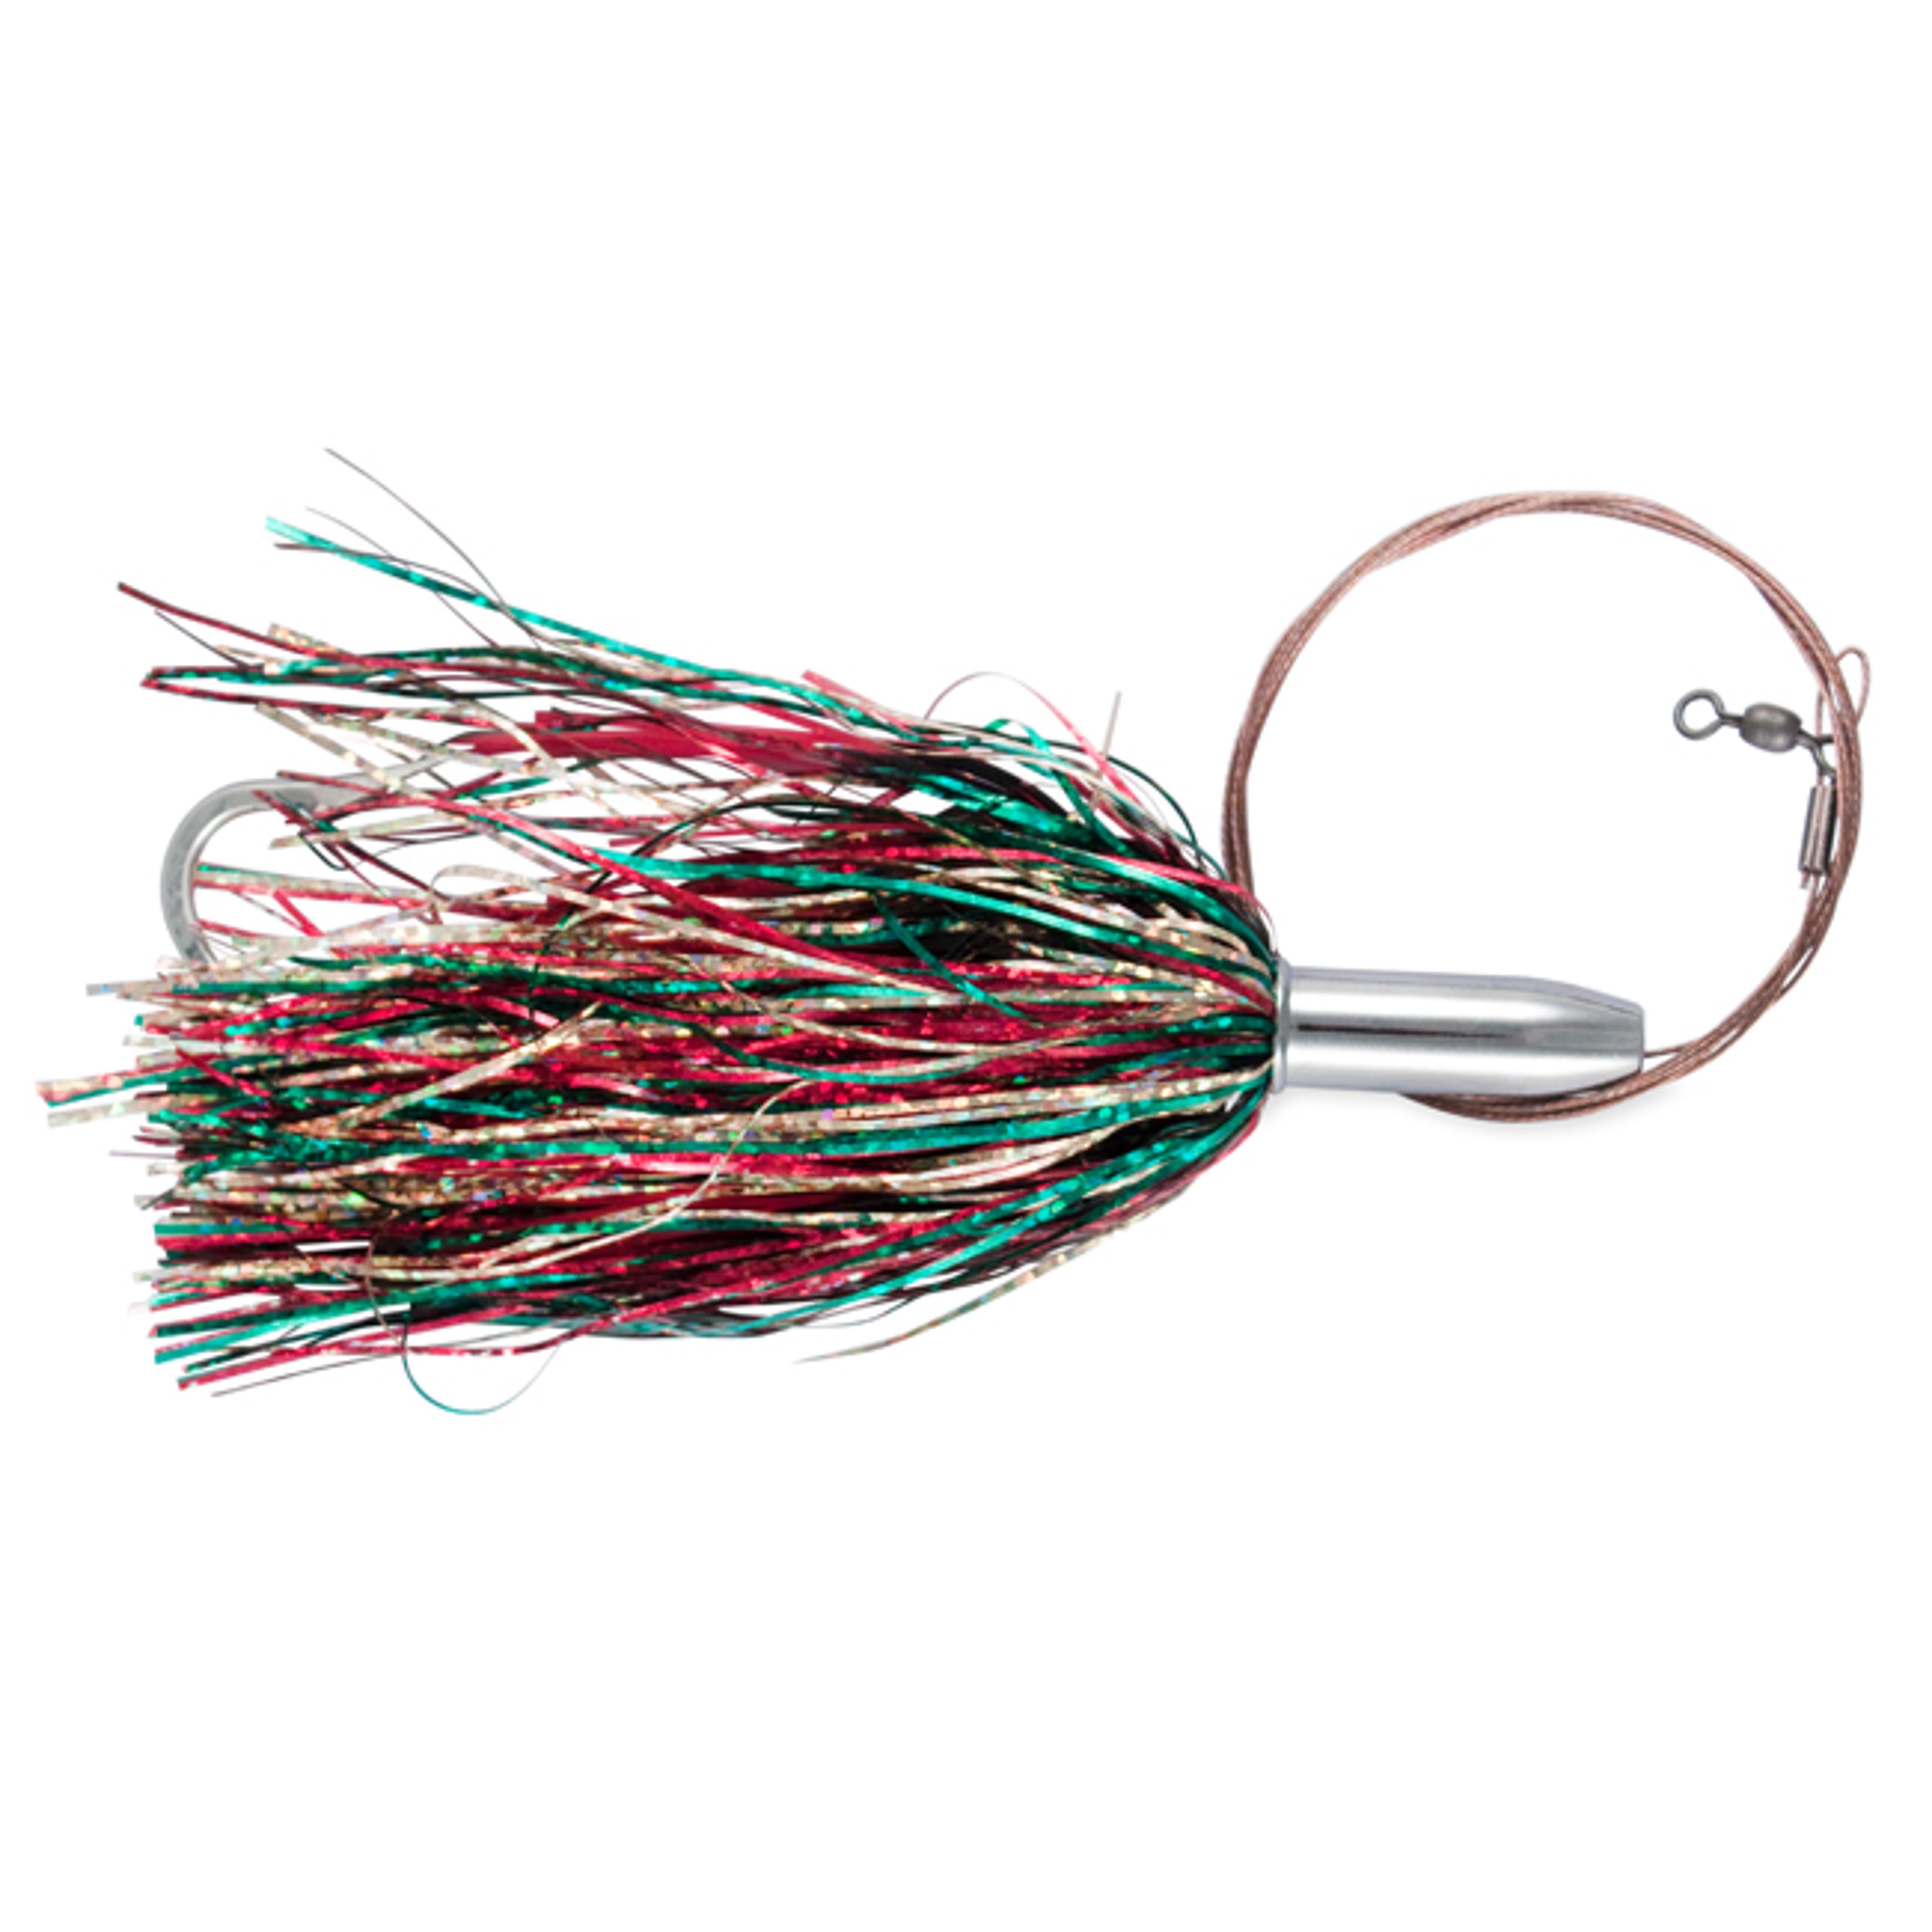 Billy Baits Mini Turbo Slammer Rigged & Ready, Green/Gold/Red/Red:  Fishermans Ideal Supply House